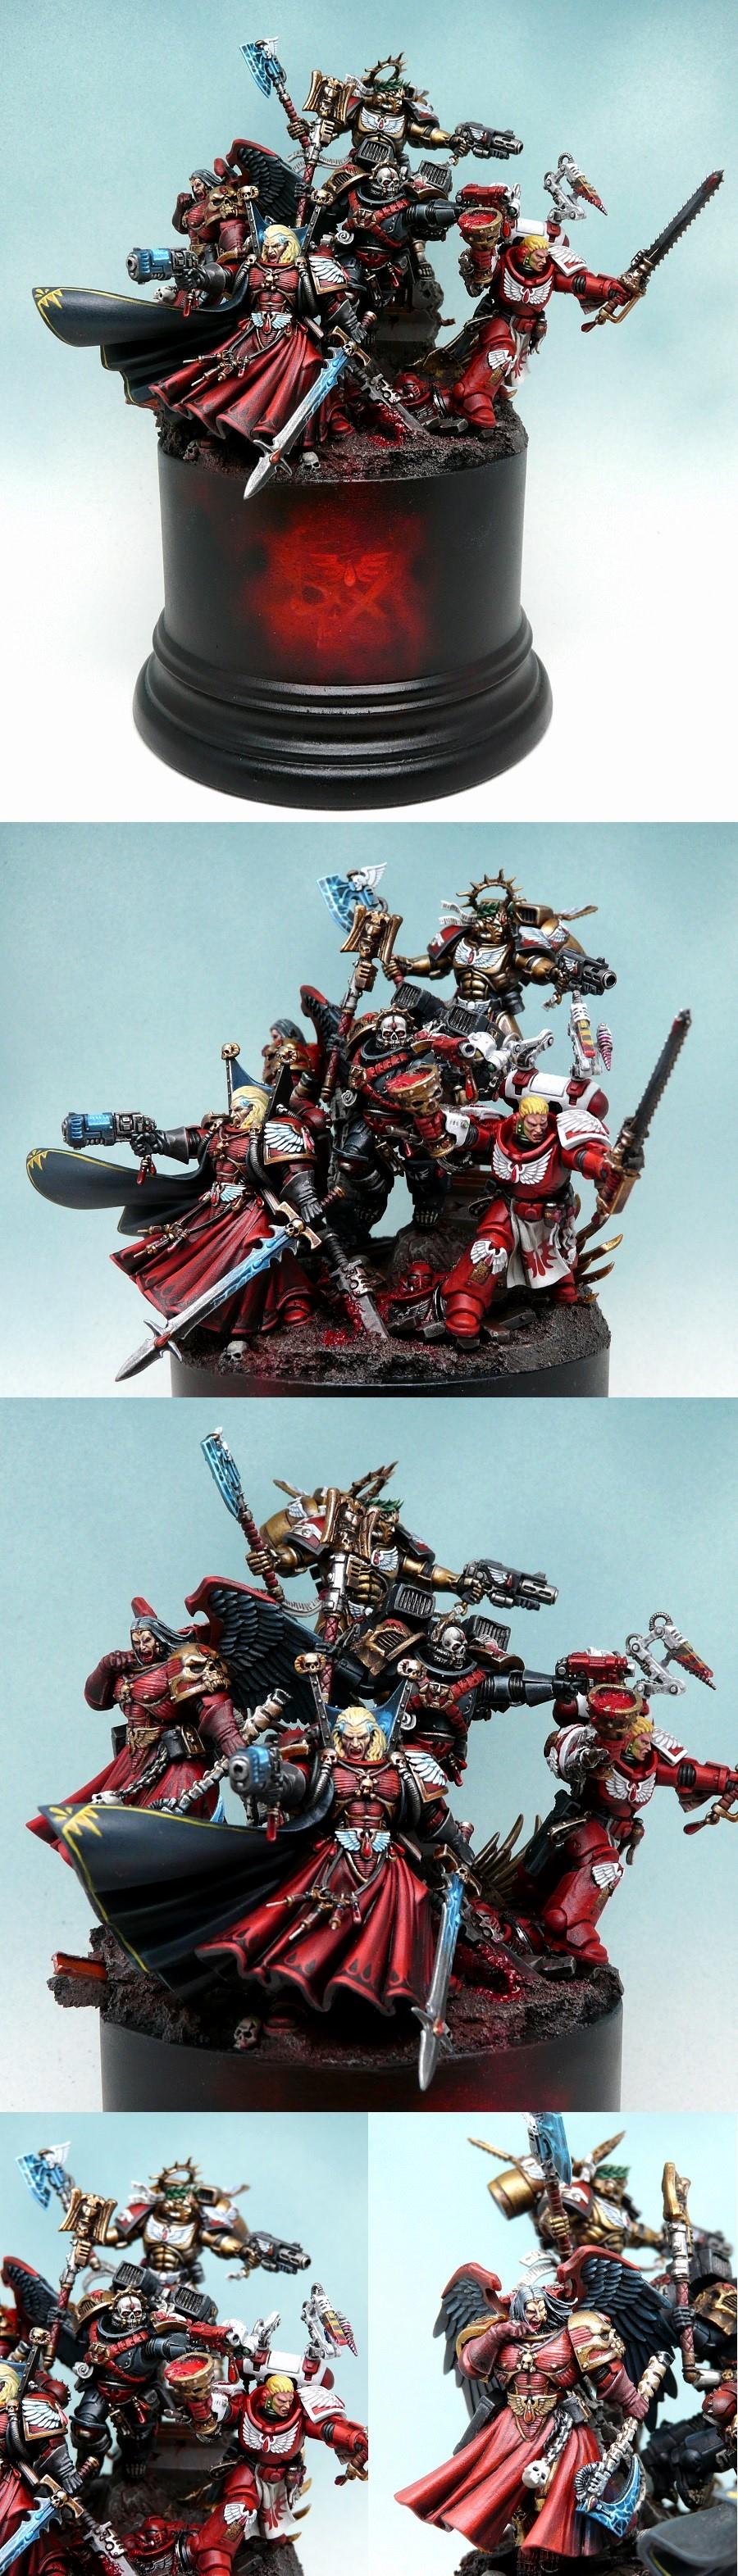 Apothecary, Astorath, Astorath The Grim, Blood Angels, Chaplain, Corbulo, Dante, Guardian Of The Lost, Lemartes, Librarian, Lord Of Death, Master Chapter, Mephiston, Primaris, Sanguinary Priest, Space Marines